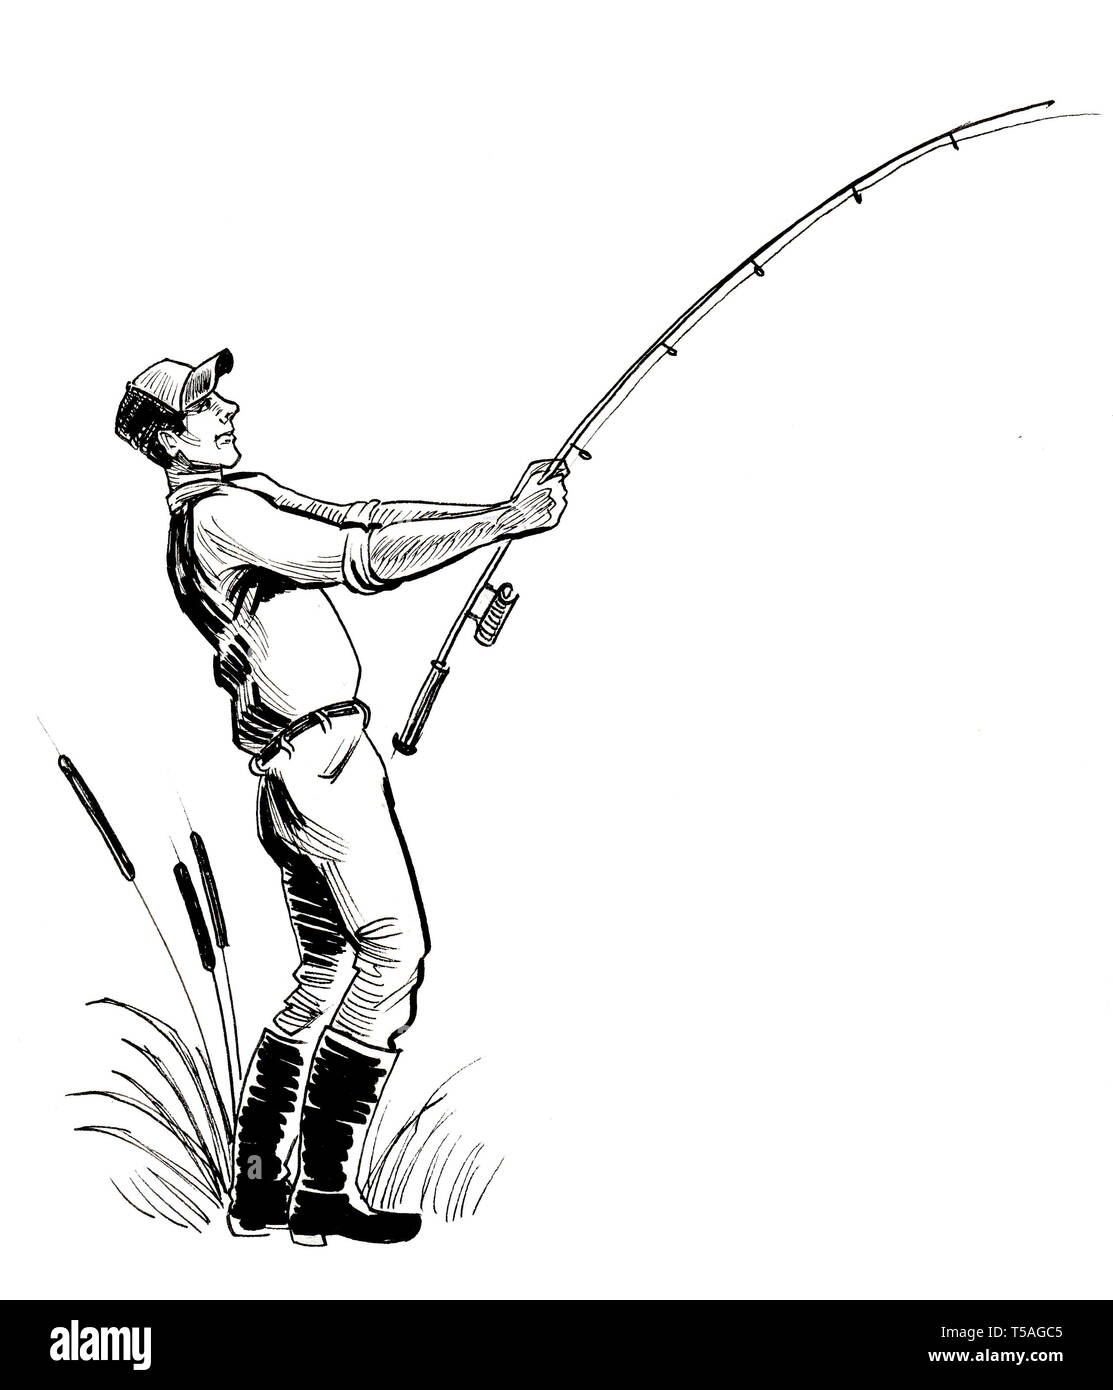 Man With A Fishing Rod Ink Black And White Drawing Stock Photo Alamy Feel free to explore, study and enjoy paintings with paintingvalley.com. https www alamy com man with a fishing rod ink black and white drawing image244250837 html